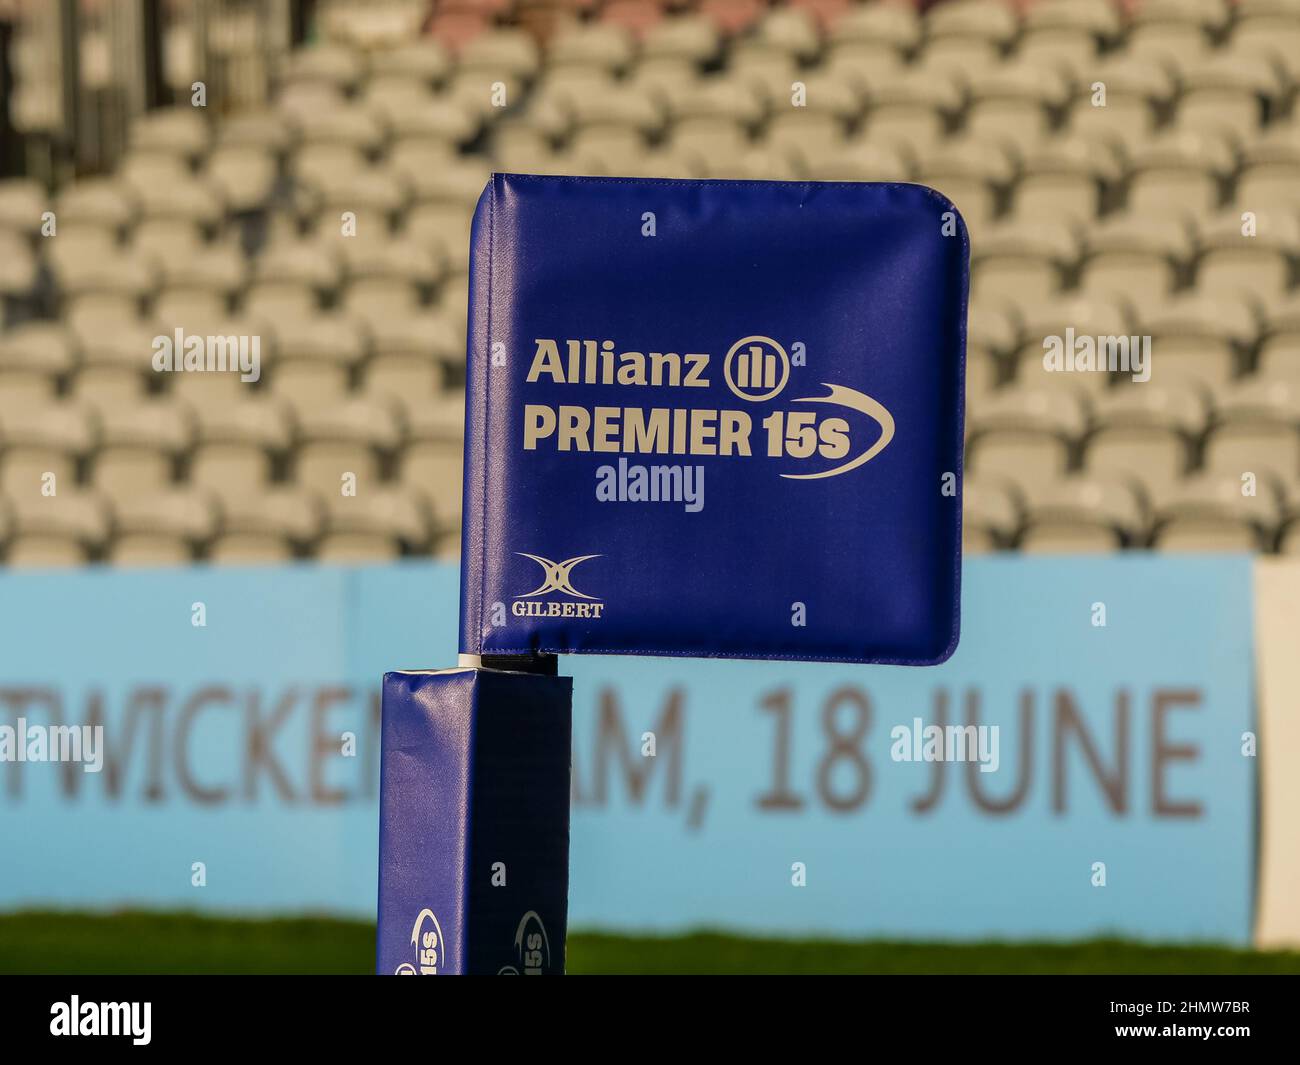 London, UK. 12th Feb, 2022. Twickenham Stoop, London, England, February 12th 2022 Allianz Premier 15s corner flag flies in the match between Harlequins Women and Worcester Warriors Women in Round 10 of the Allianz Premier 15s at the Twickenham Stoop on Saturday 12th February 2022 Claire Jeffrey/SPP Credit: SPP Sport Press Photo. /Alamy Live News Stock Photo